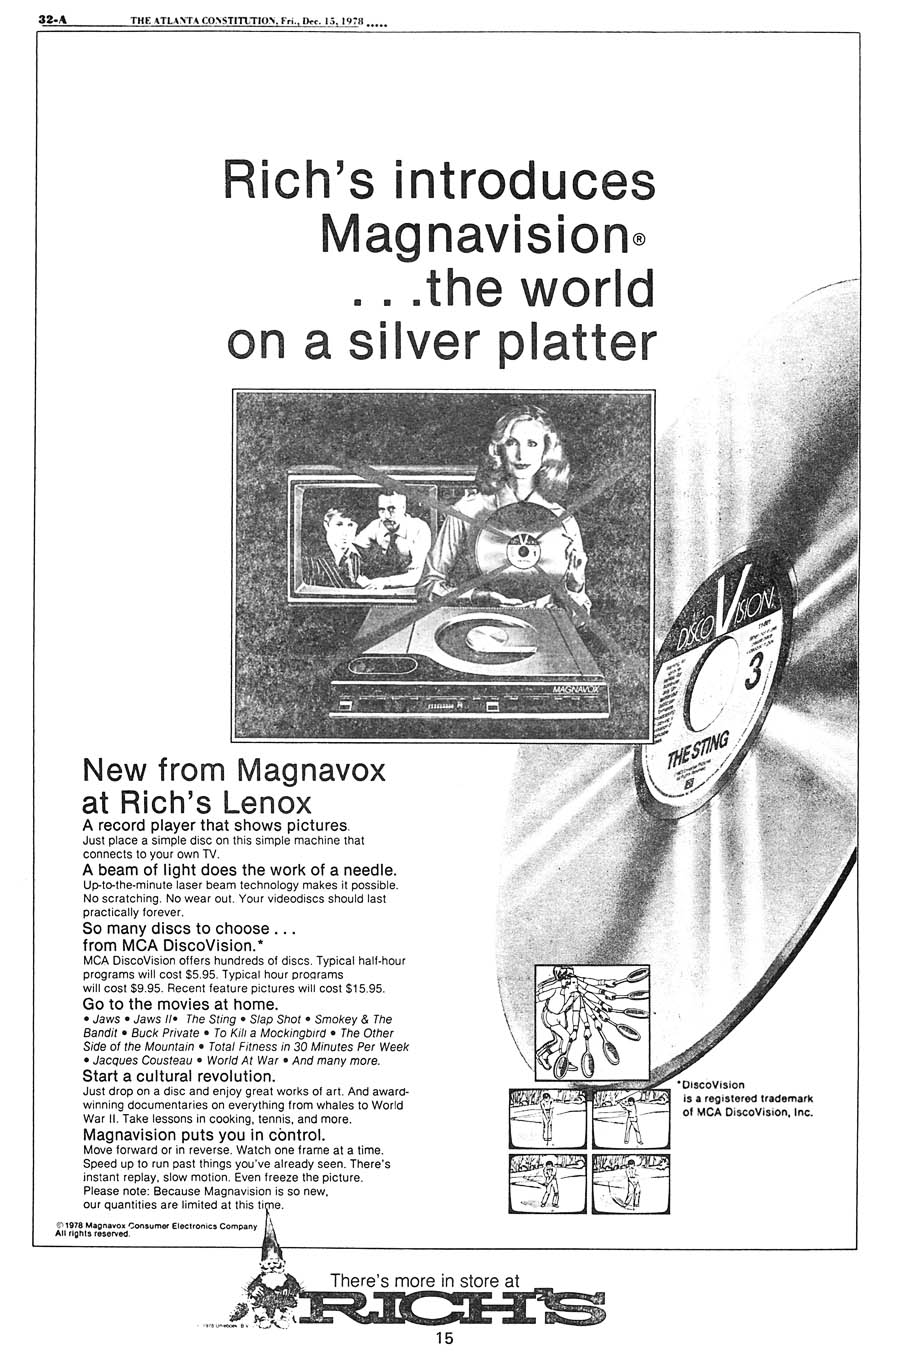 Rich's 1978 ad for Magnavision